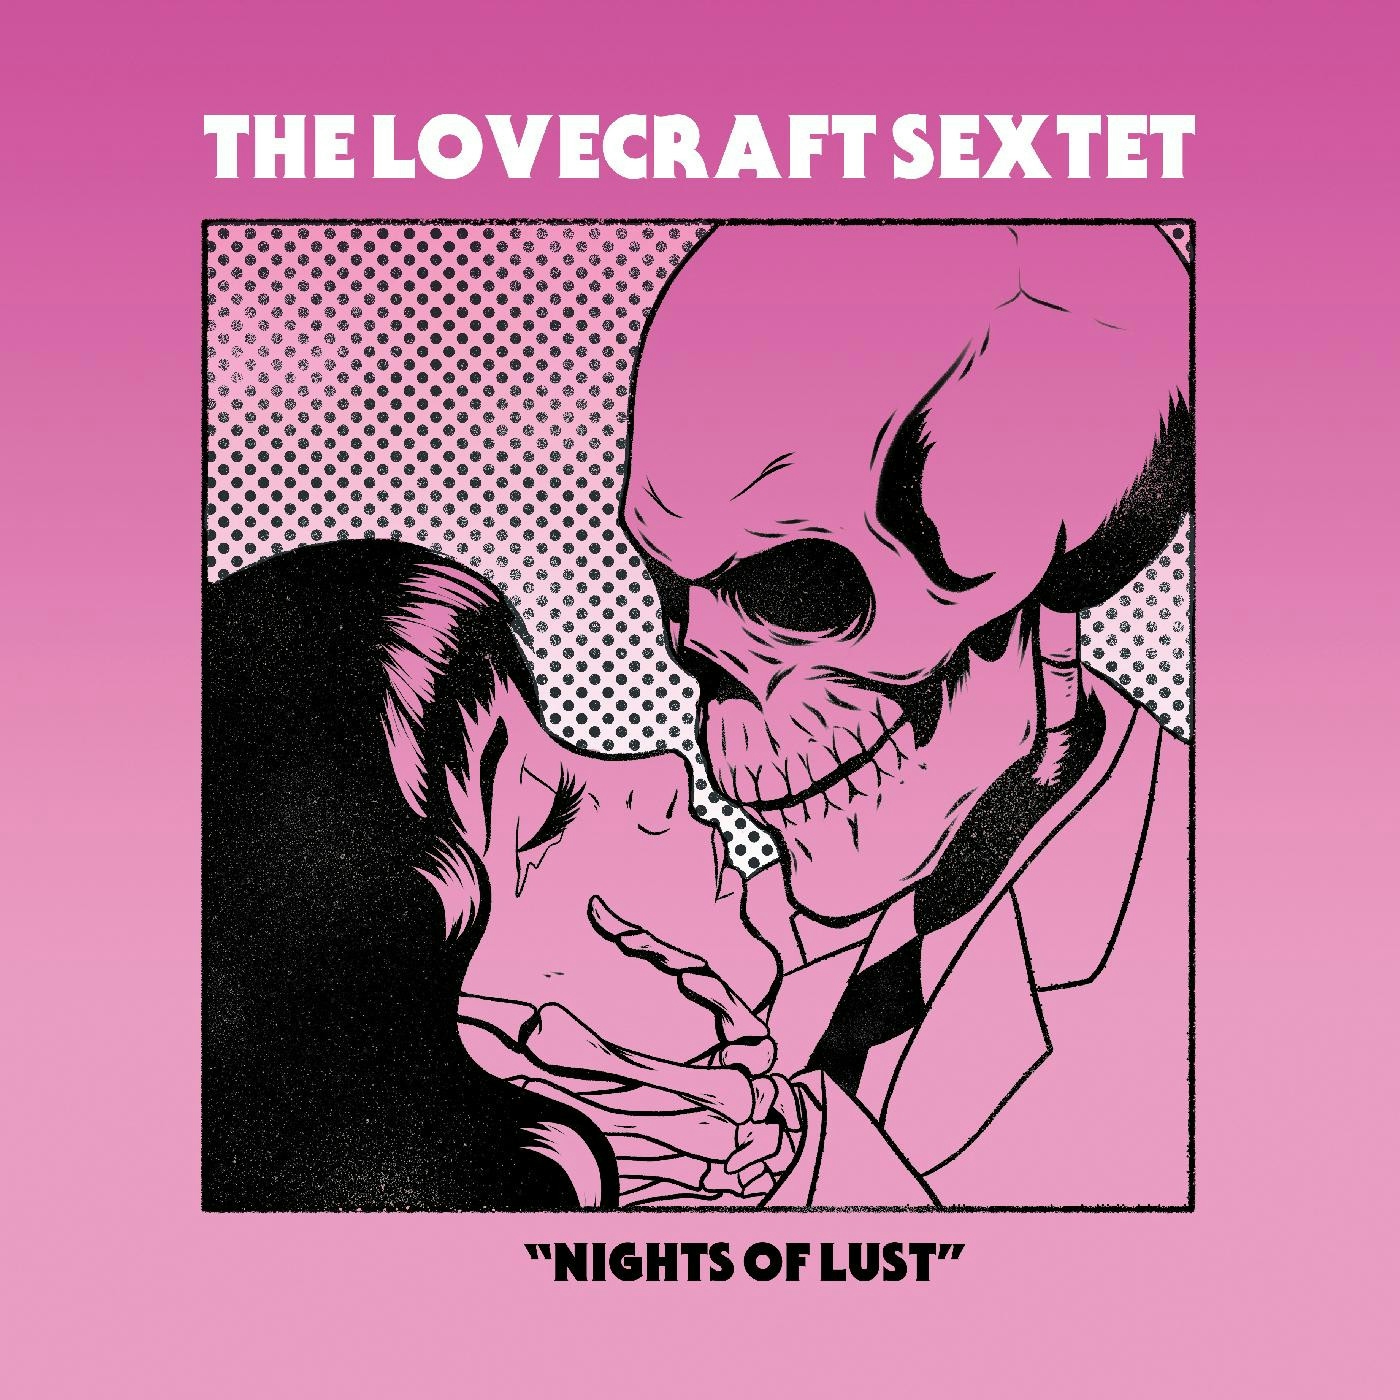 Album artwork for Album artwork for Nights of Lust by The Lovecraft Sextet by Nights of Lust - The Lovecraft Sextet